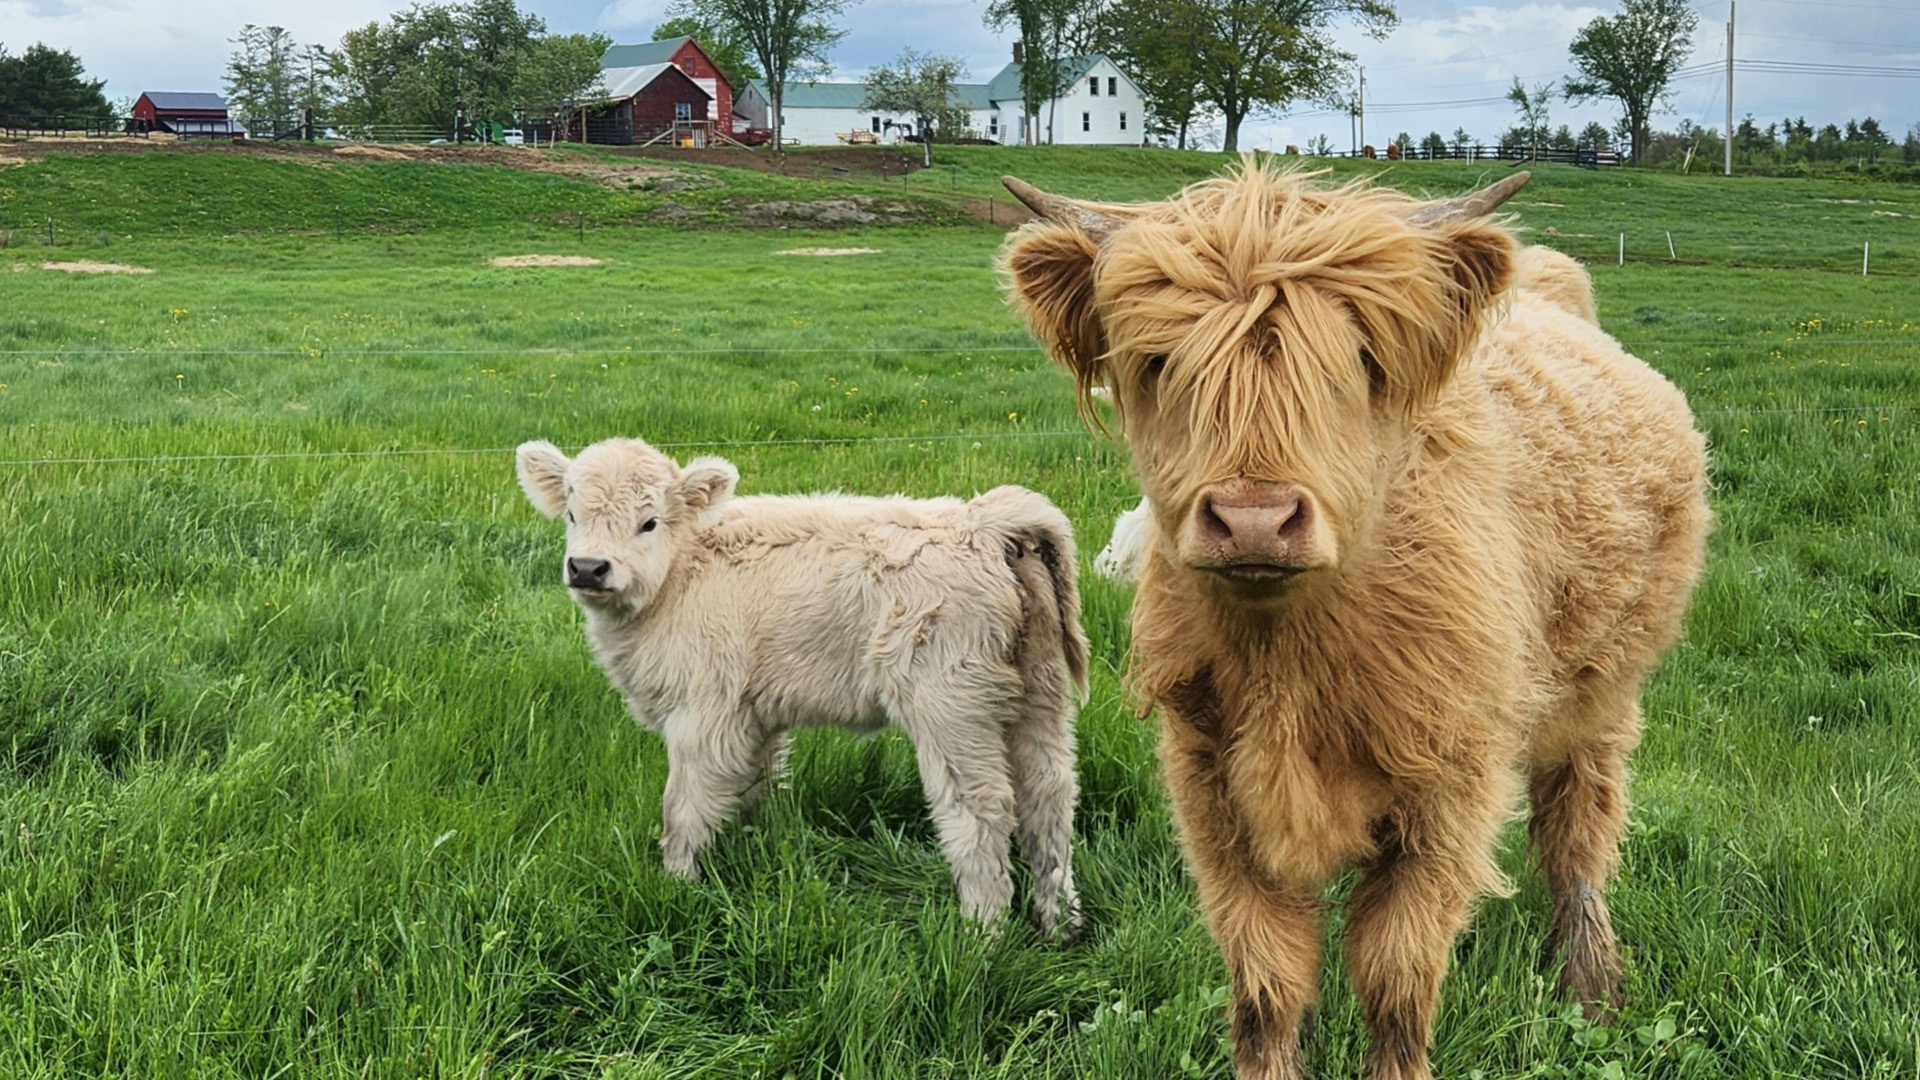 A mother and baby Highland cattle.